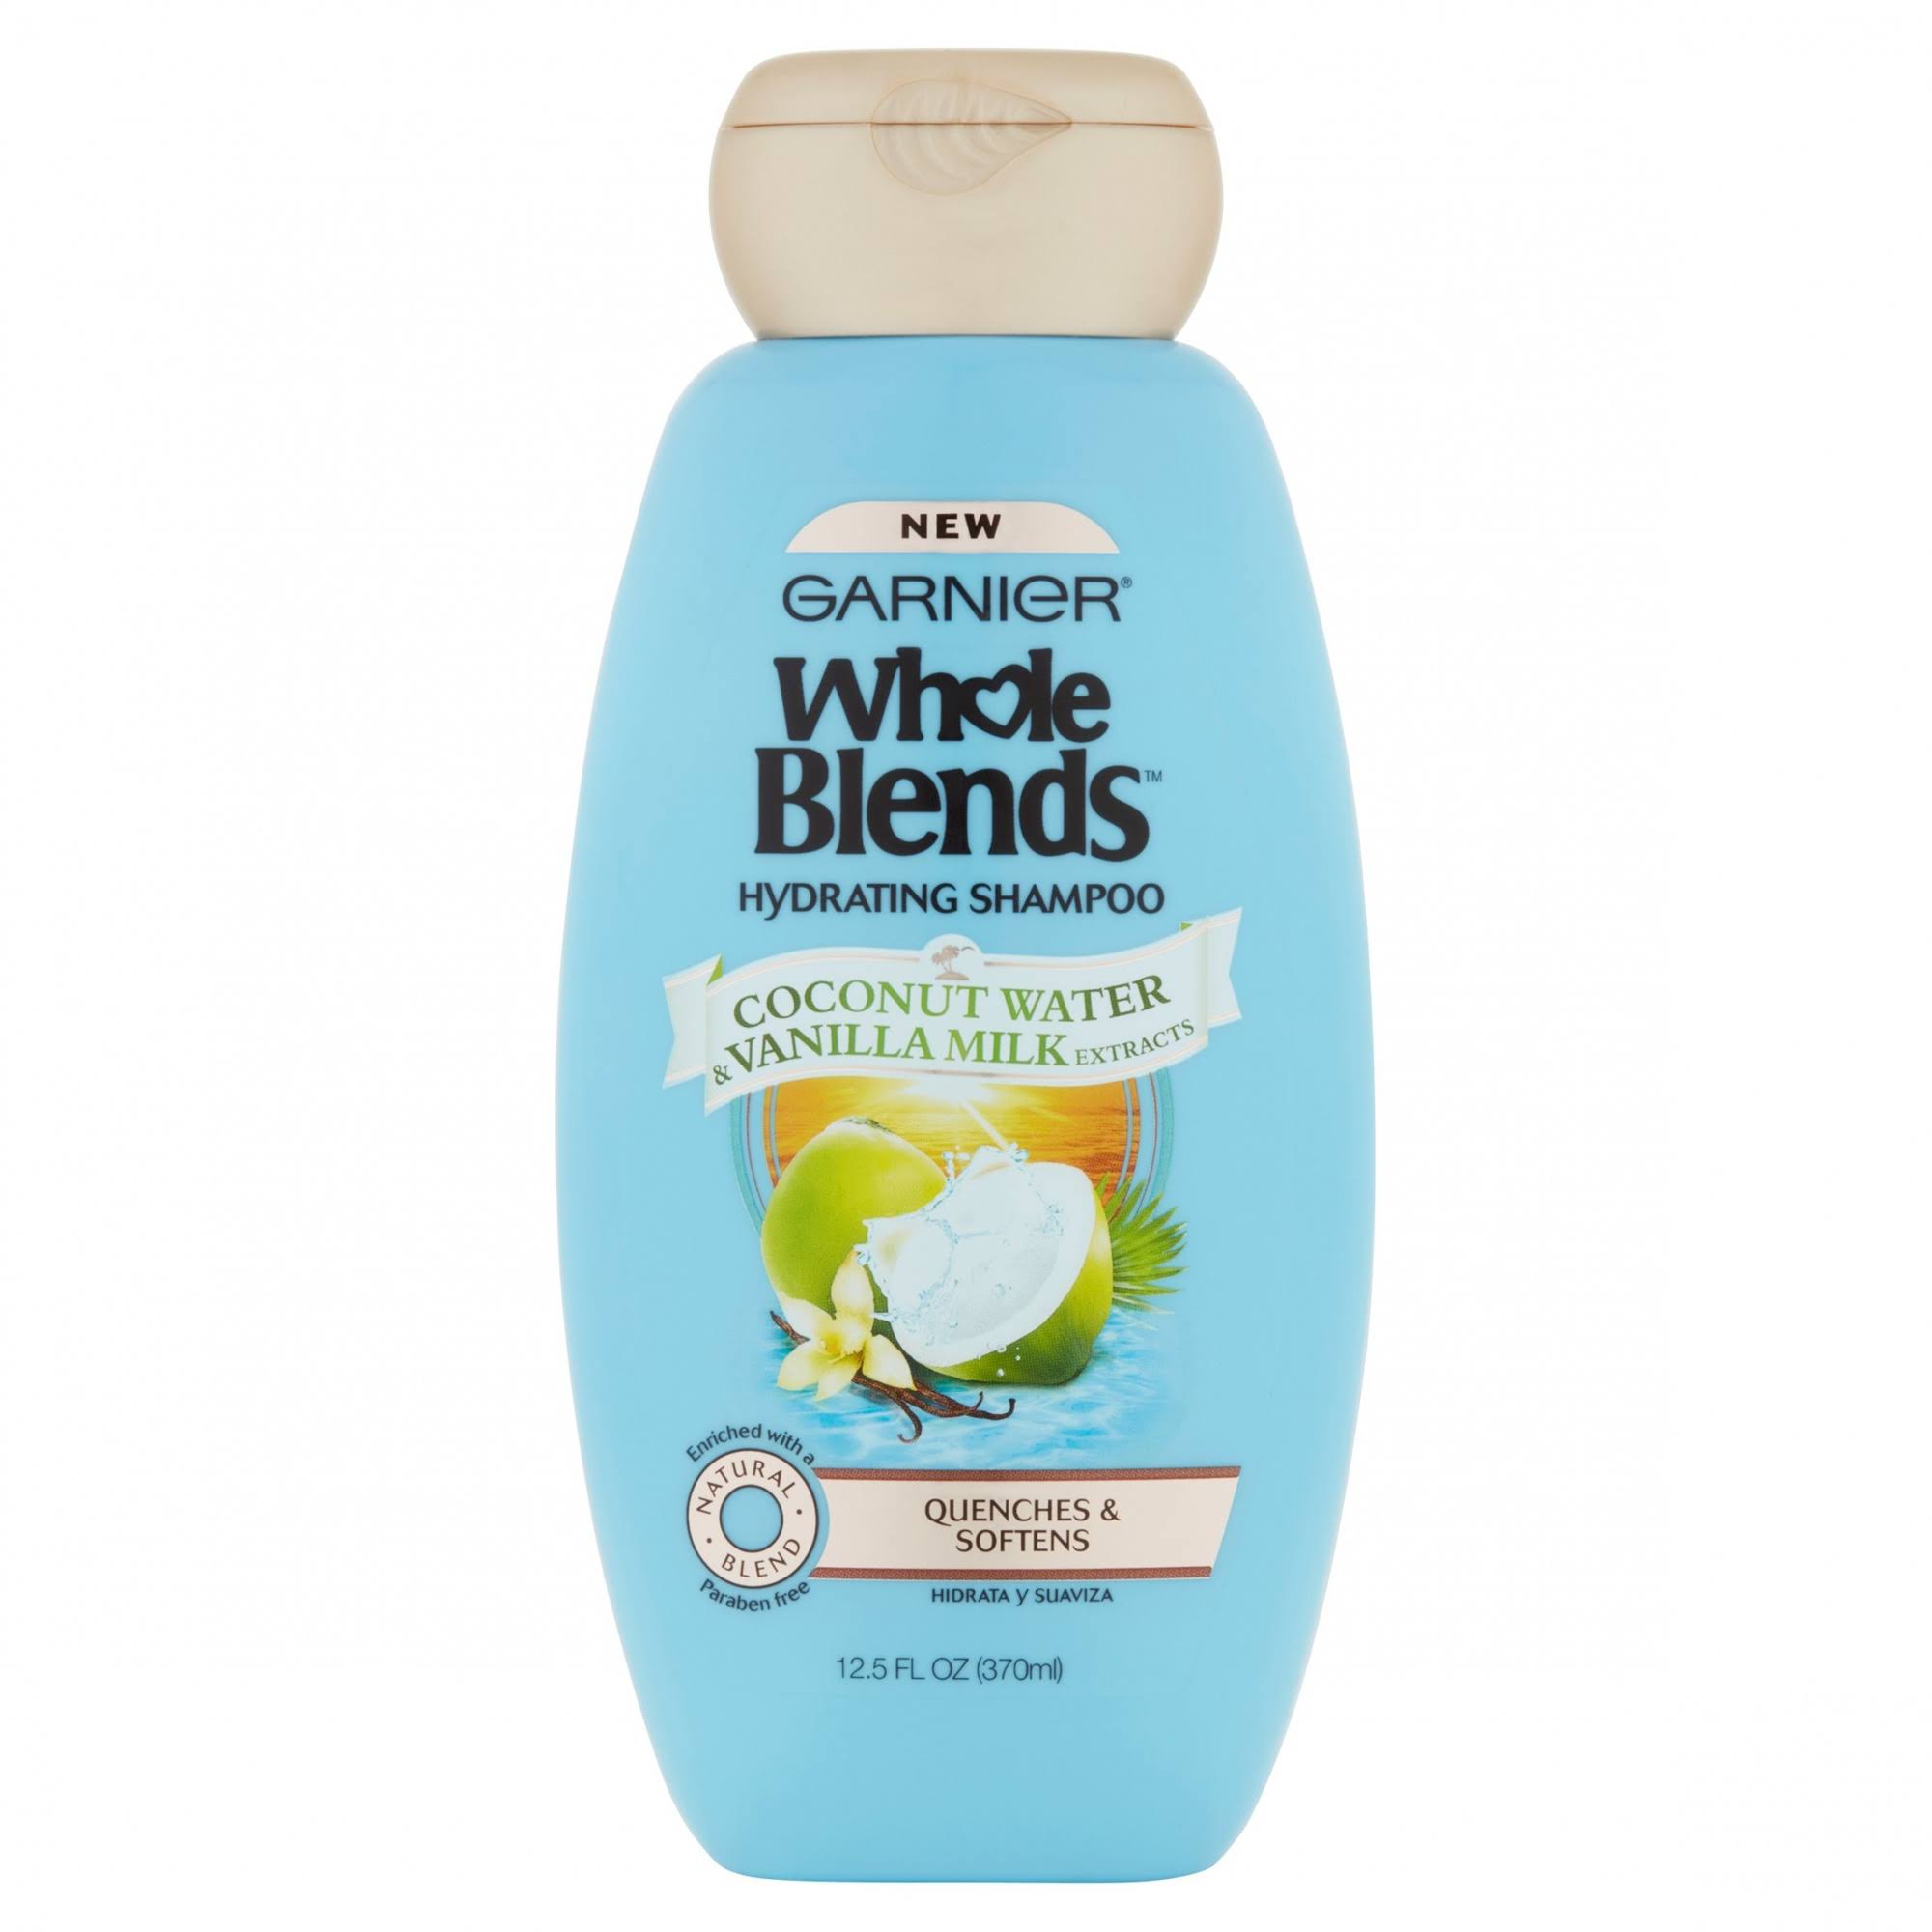 Garnier Whole Blends Hydrating Shampoo - Coconut Water and Vanilla Milk Extracts, 12.5oz